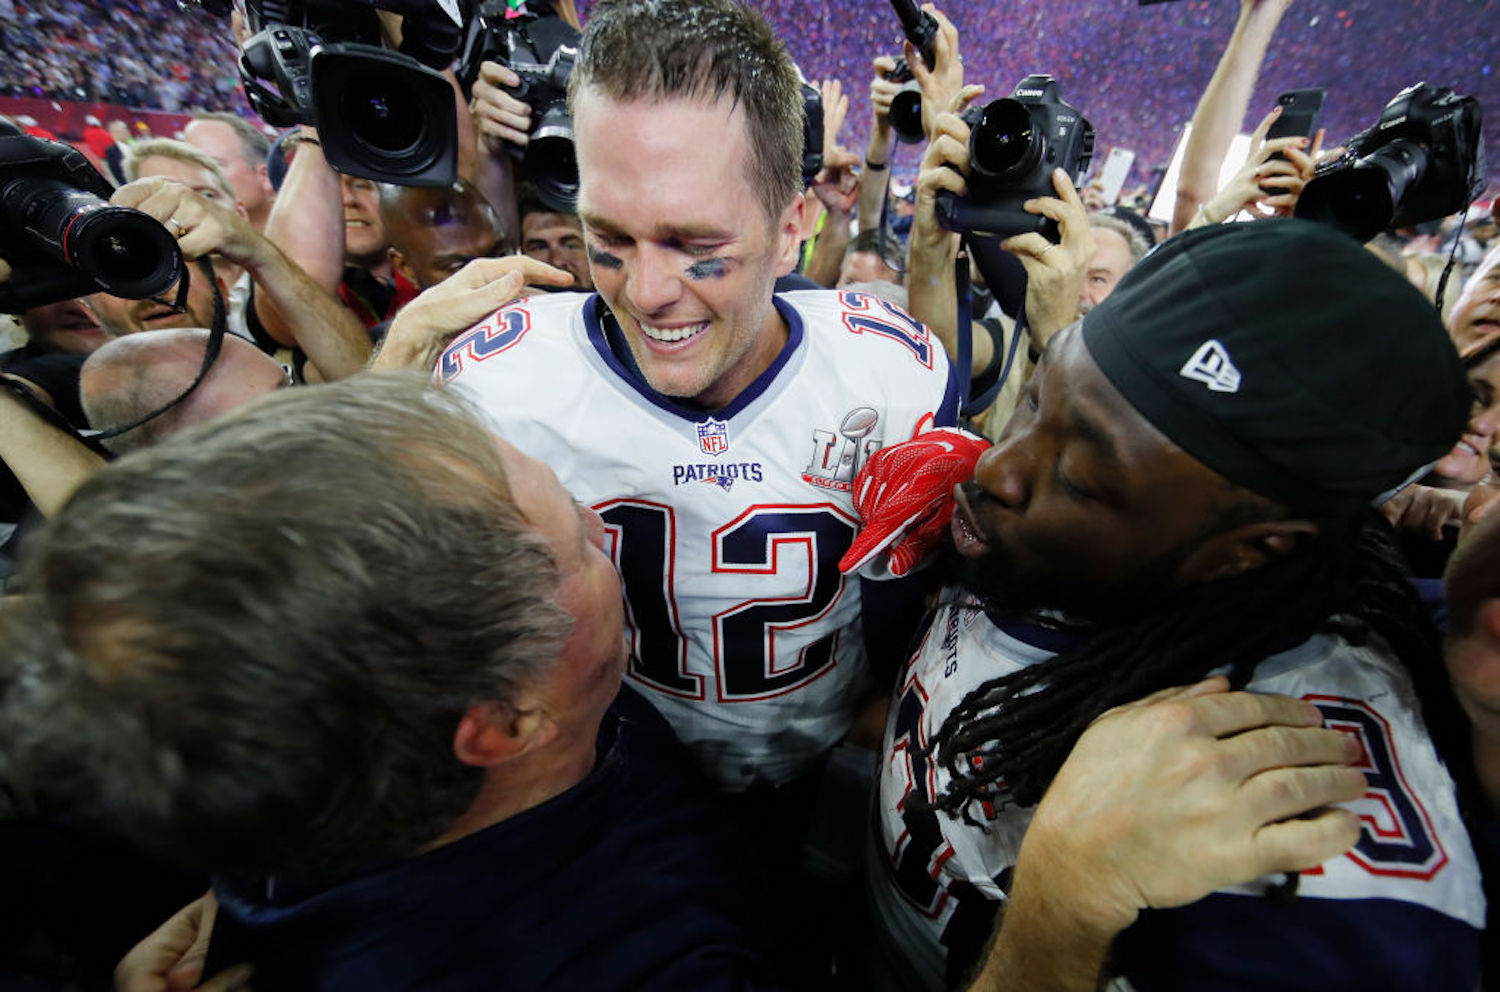 The question of who contributed more to the Patriots dynasty is one that will be debated in New England for decades. What's LeGarrette Blount's answer?